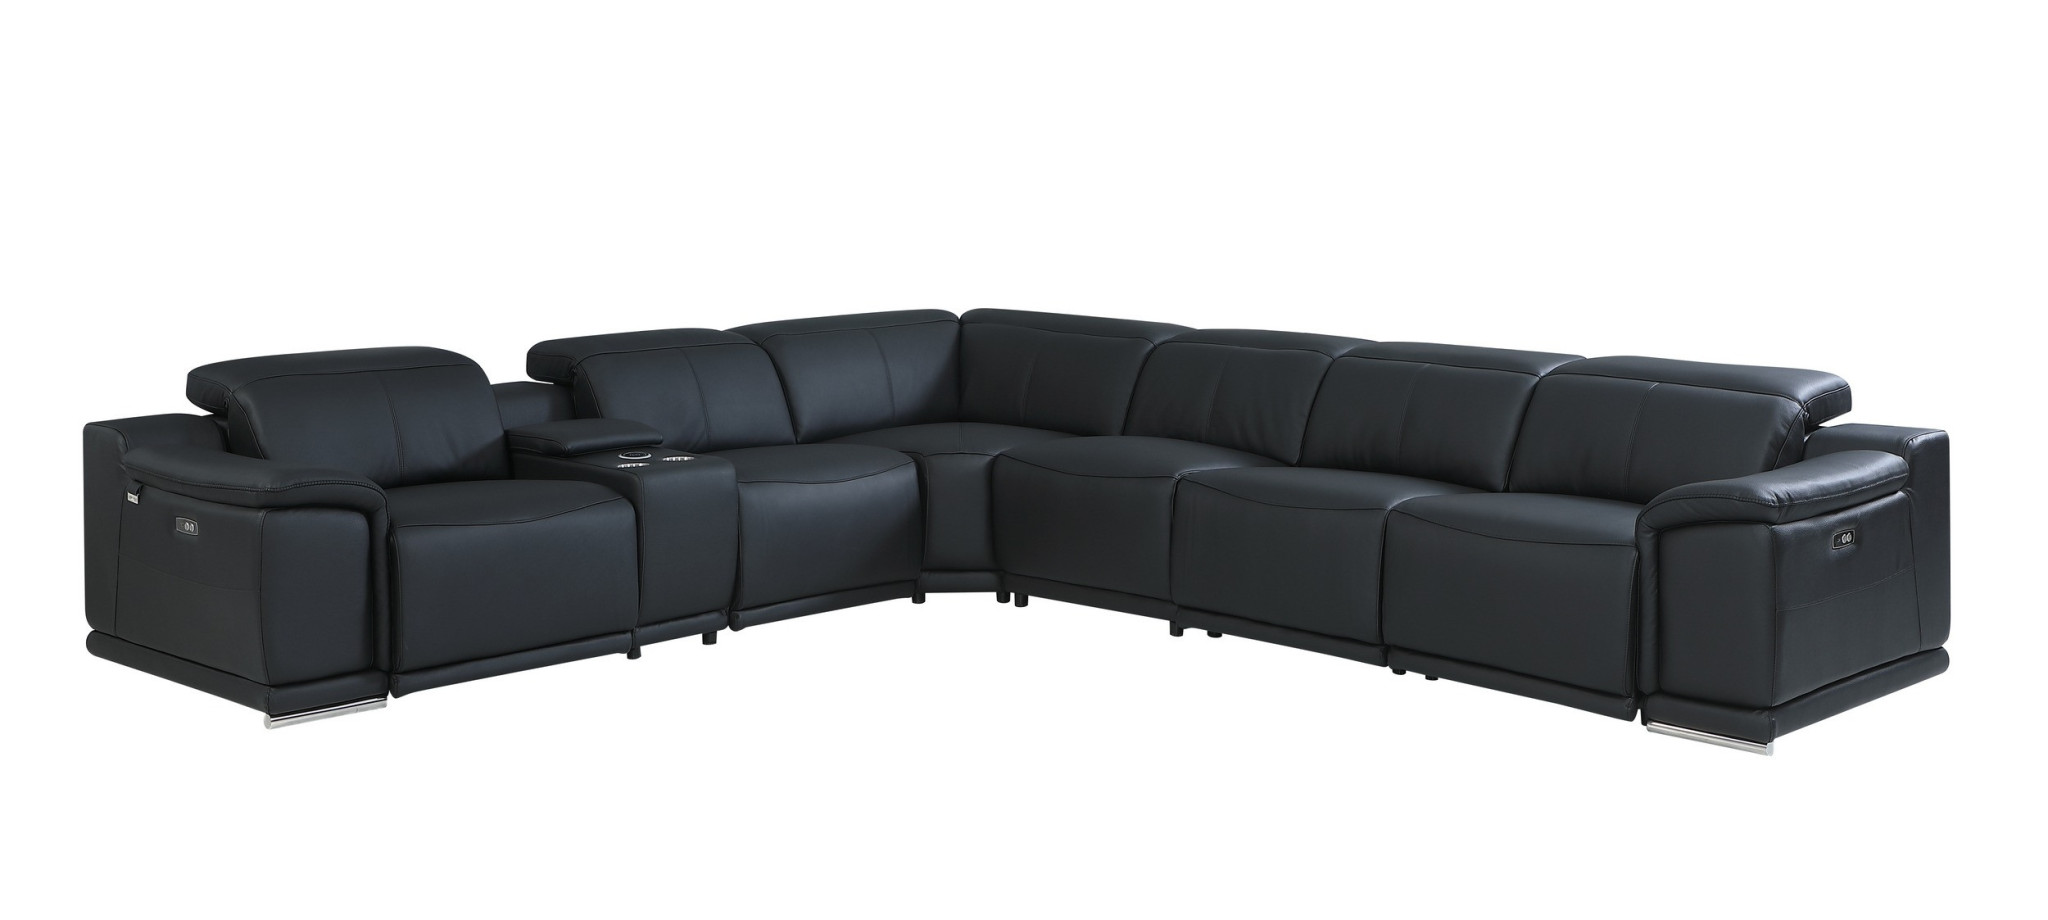 Hoom Roots Black Italian Leather Power Reclining U Shaped Seven Piece Corner Sectional With Console